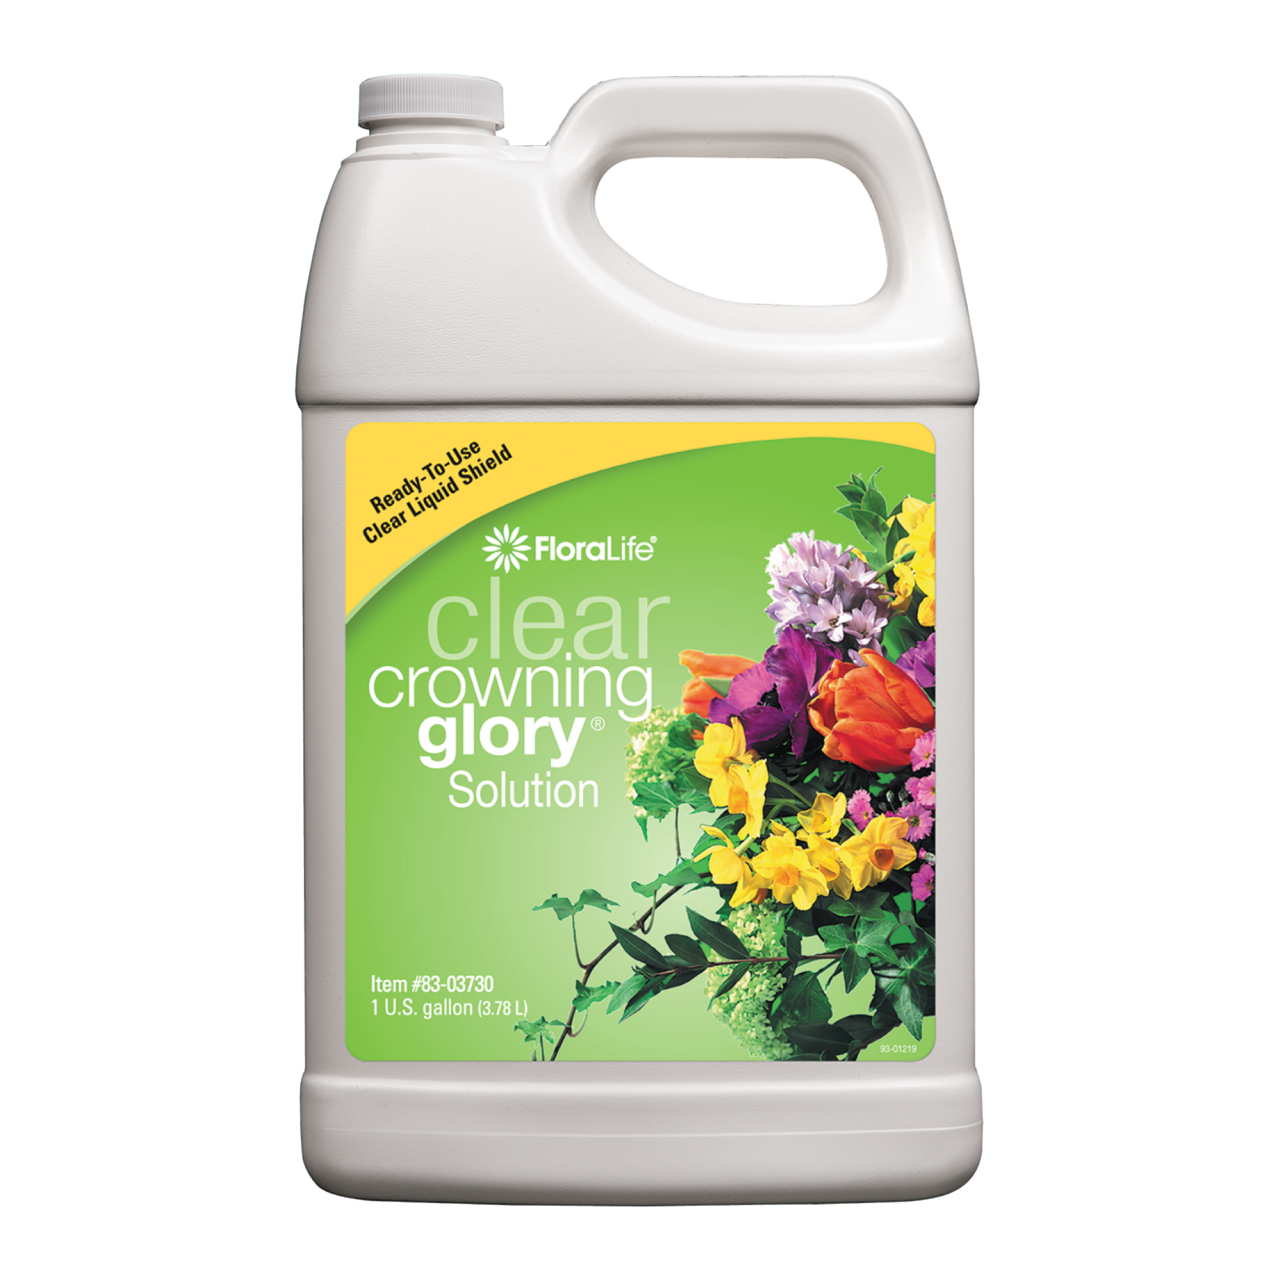 83-03730_ClearCrowningGlory_1gal_2000X2000